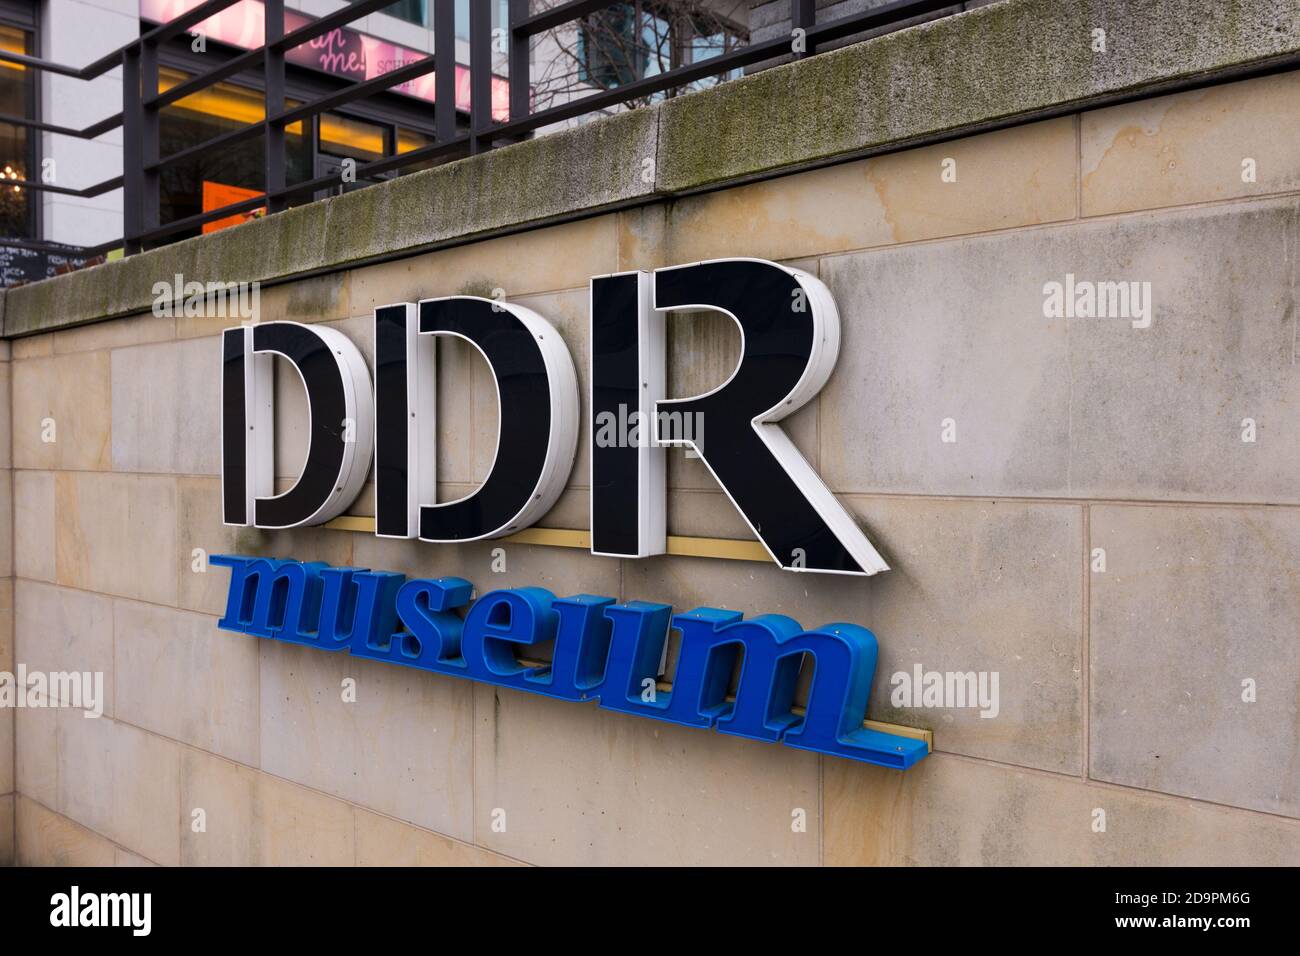 Berlin / Germany - February 12, 2017: DDR Museum, East Germany Museum in central Berlin, Germany Stock Photo